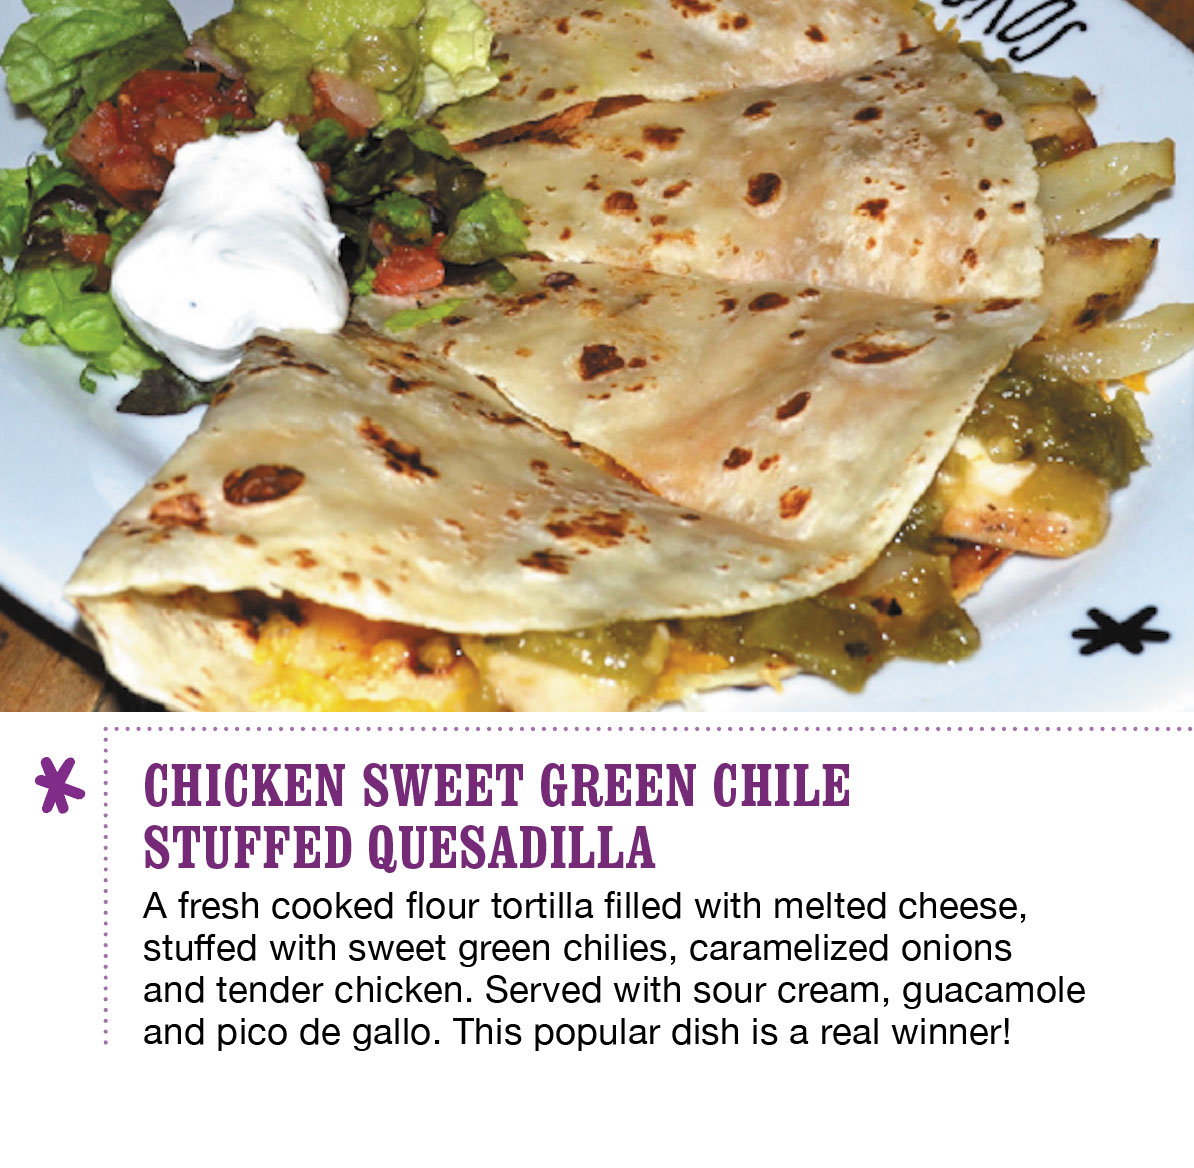 Stuffed quesadillas at Milagros are sought out by Utah Mexican foodies